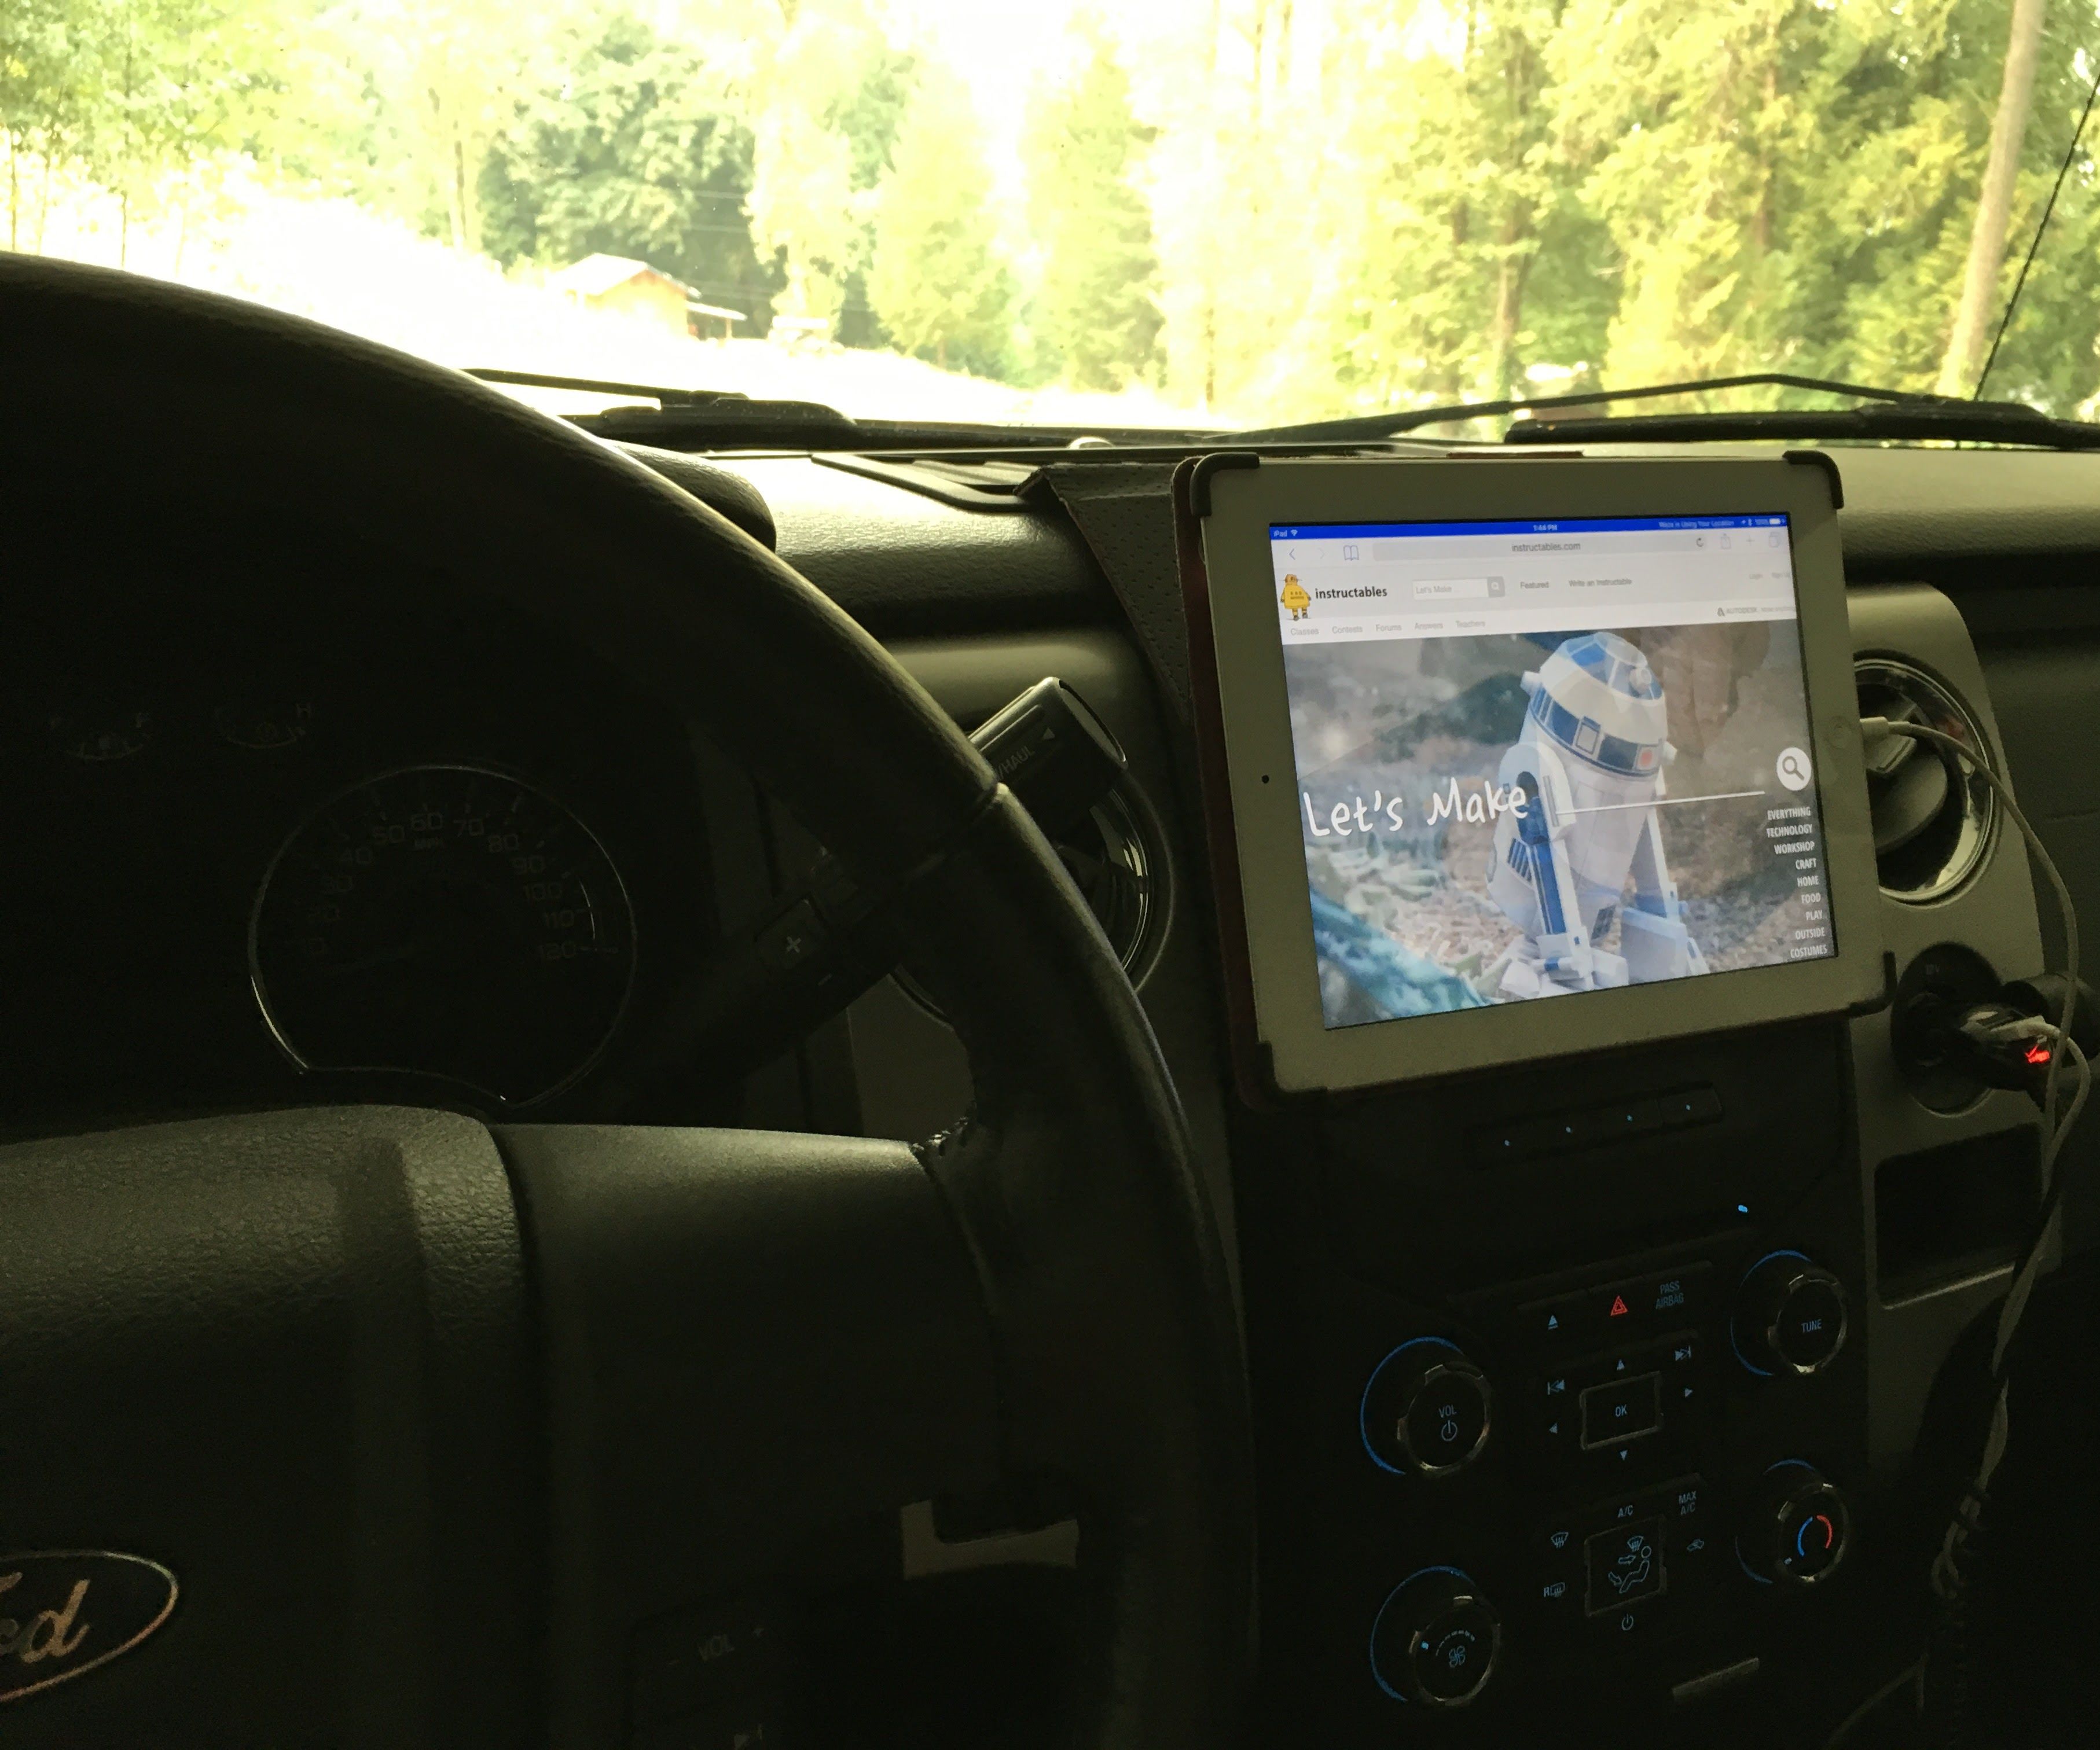 Repurpose Old IPad As a Hands-Free Car Assistant